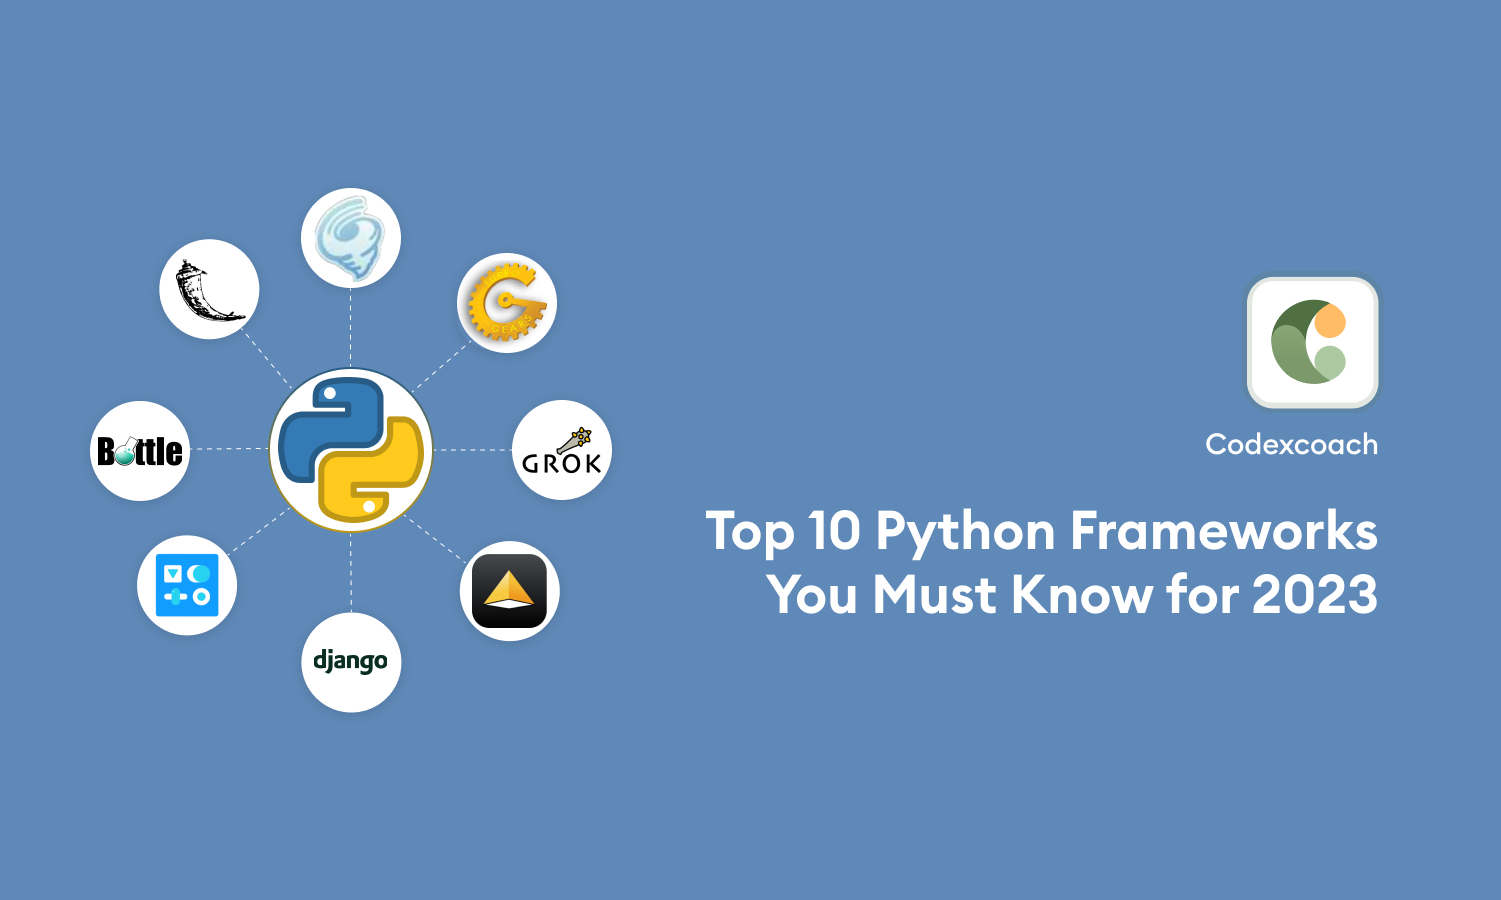 Top 10 Python Frameworks You Must Know for 2023